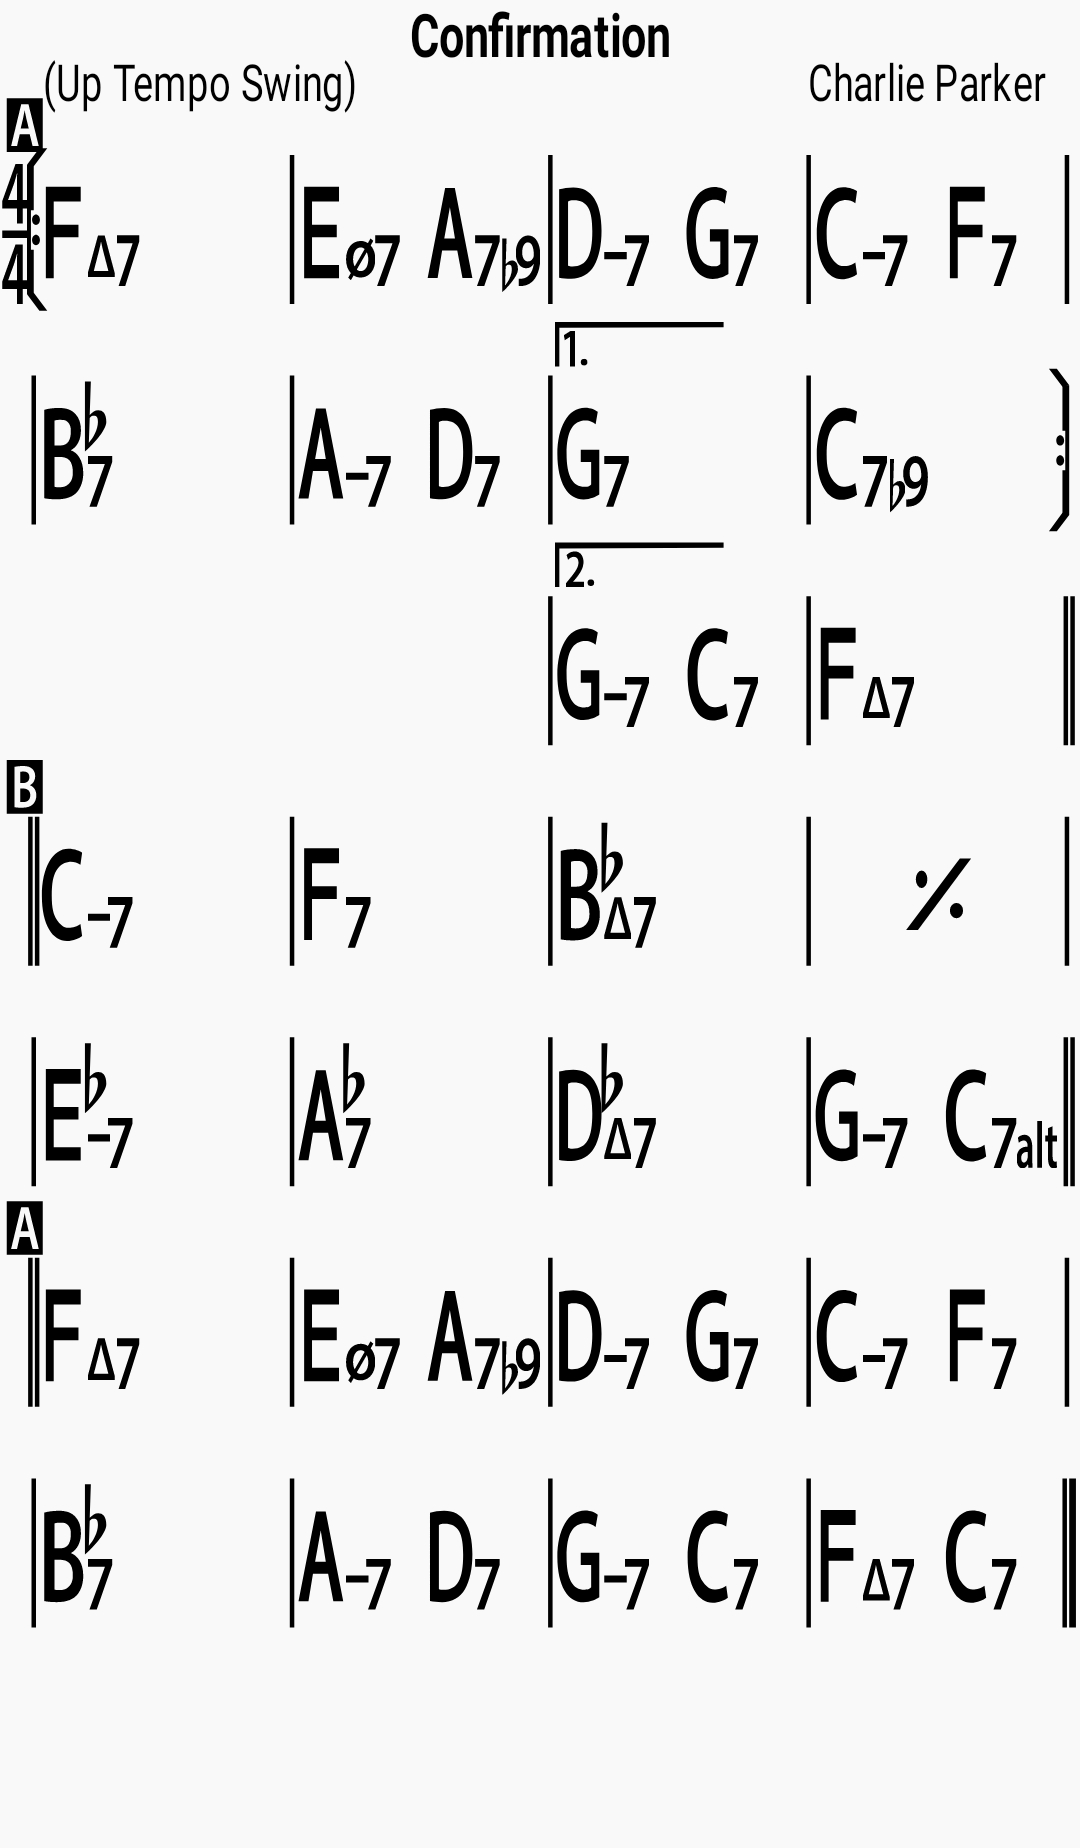 Chord chart for the jazz standard Confirmation